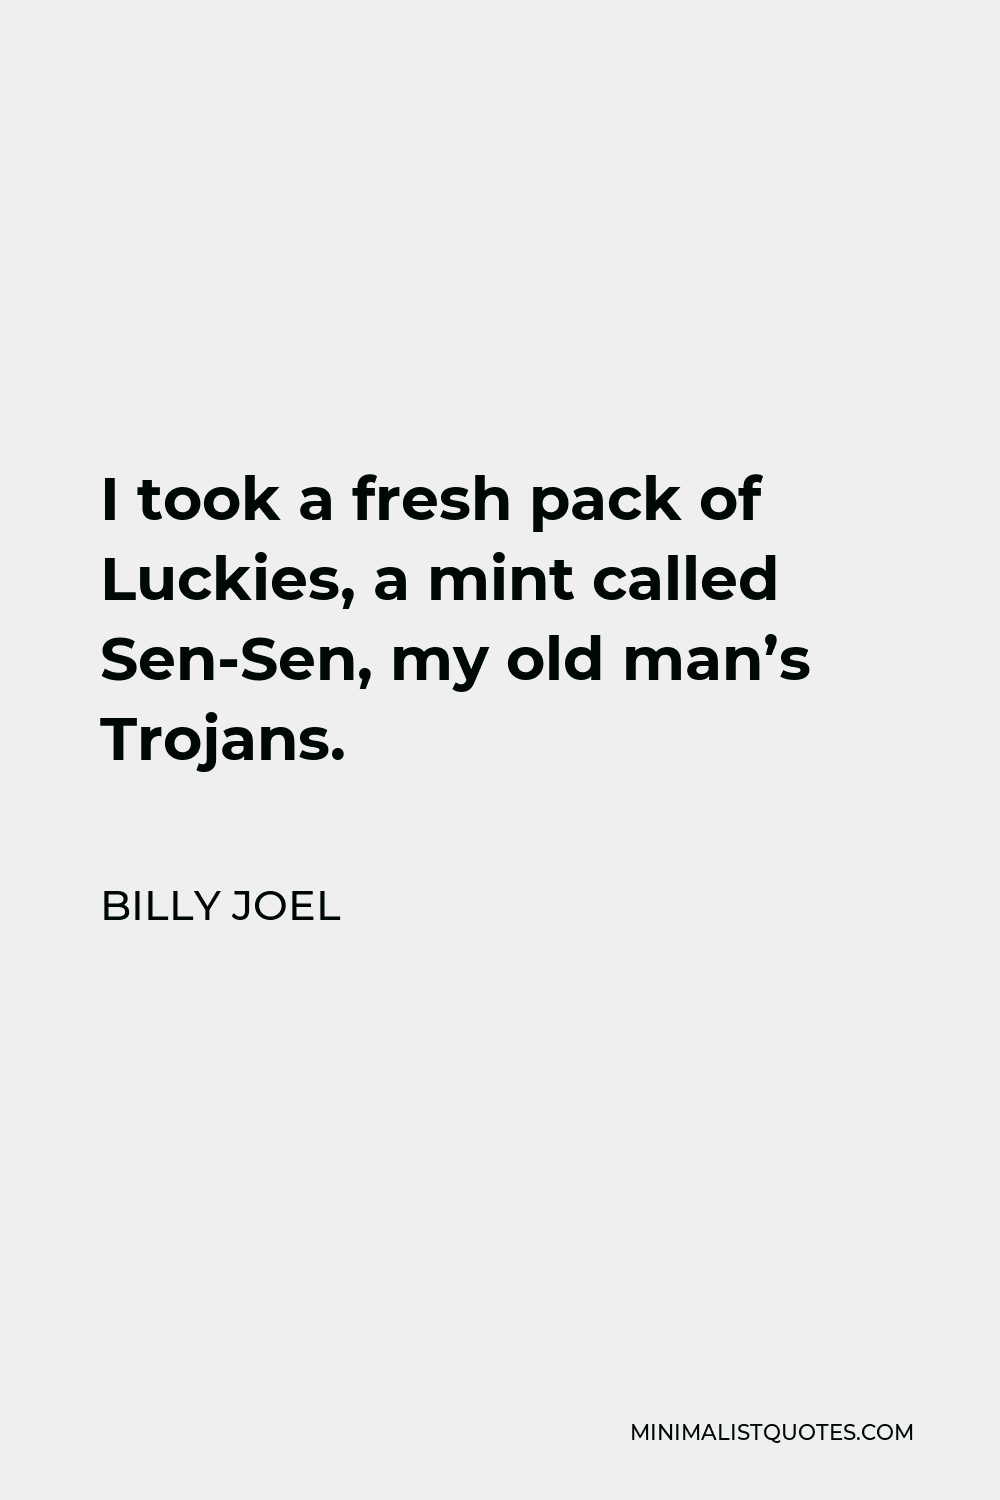 Billy Joel Quote - I took a fresh pack of Luckies, a mint called Sen-Sen, my old man’s Trojans.